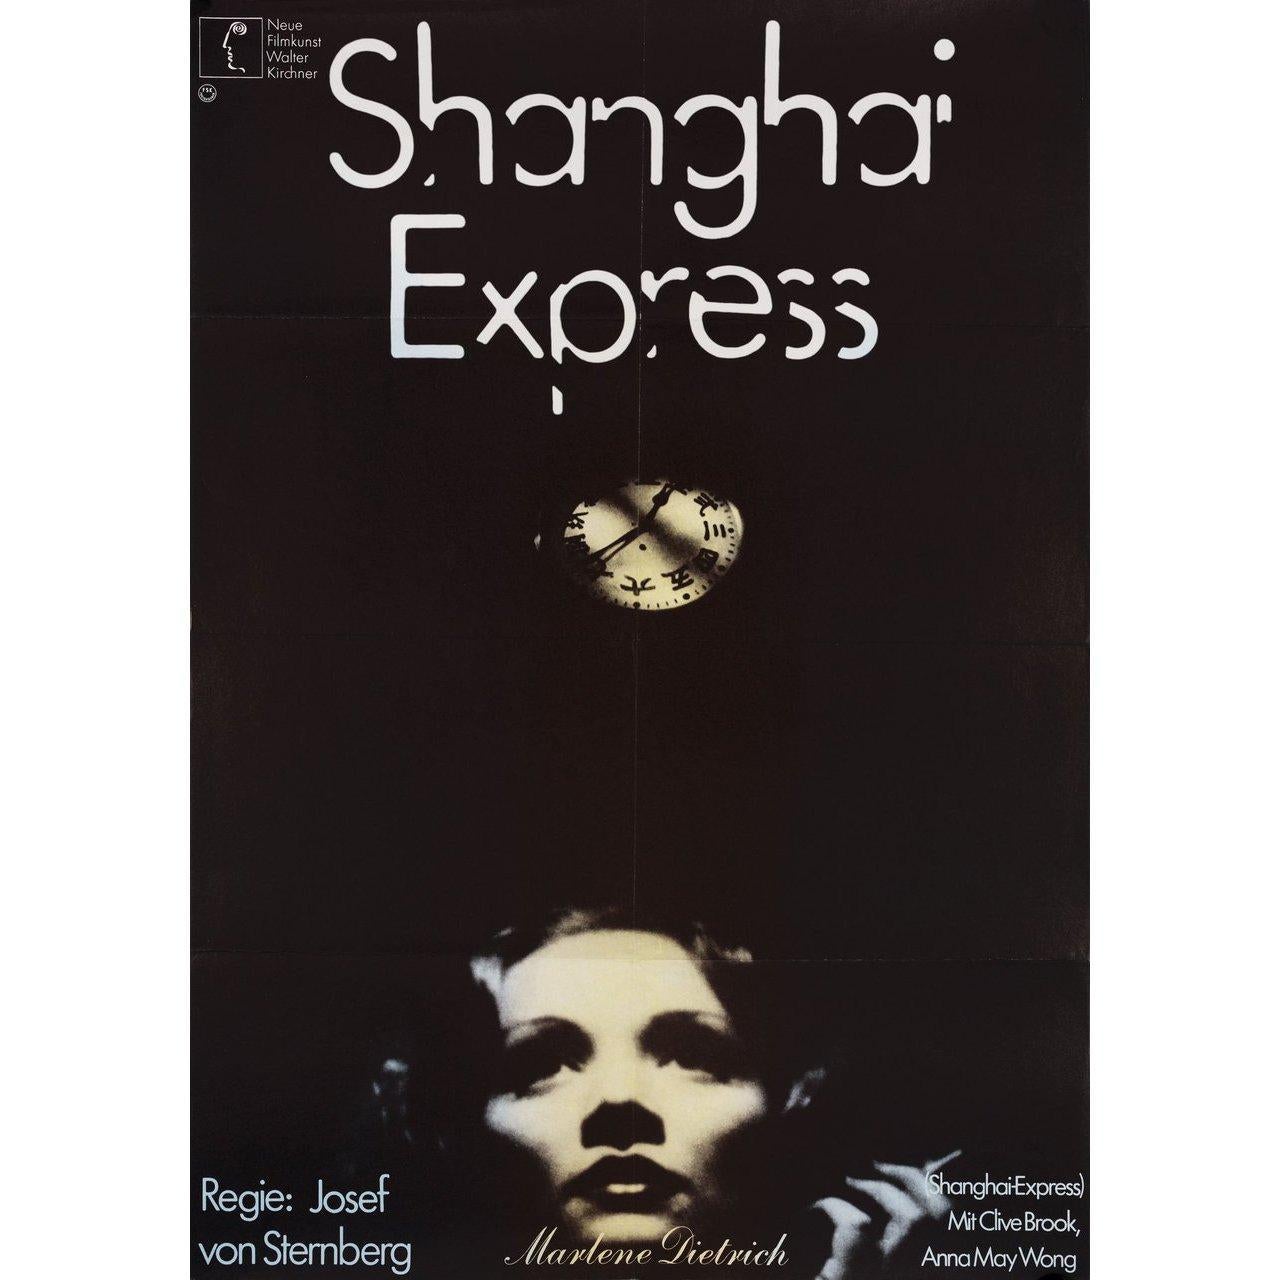 Original 1970 re-release German A1 poster by Hans Hillmann for the 1932 film Shanghai Express directed by Josef von Sternberg with Marlene Dietrich / Clive Brook / Anna May Wong / Warner Oland. Fine condition, folded. Many original posters were